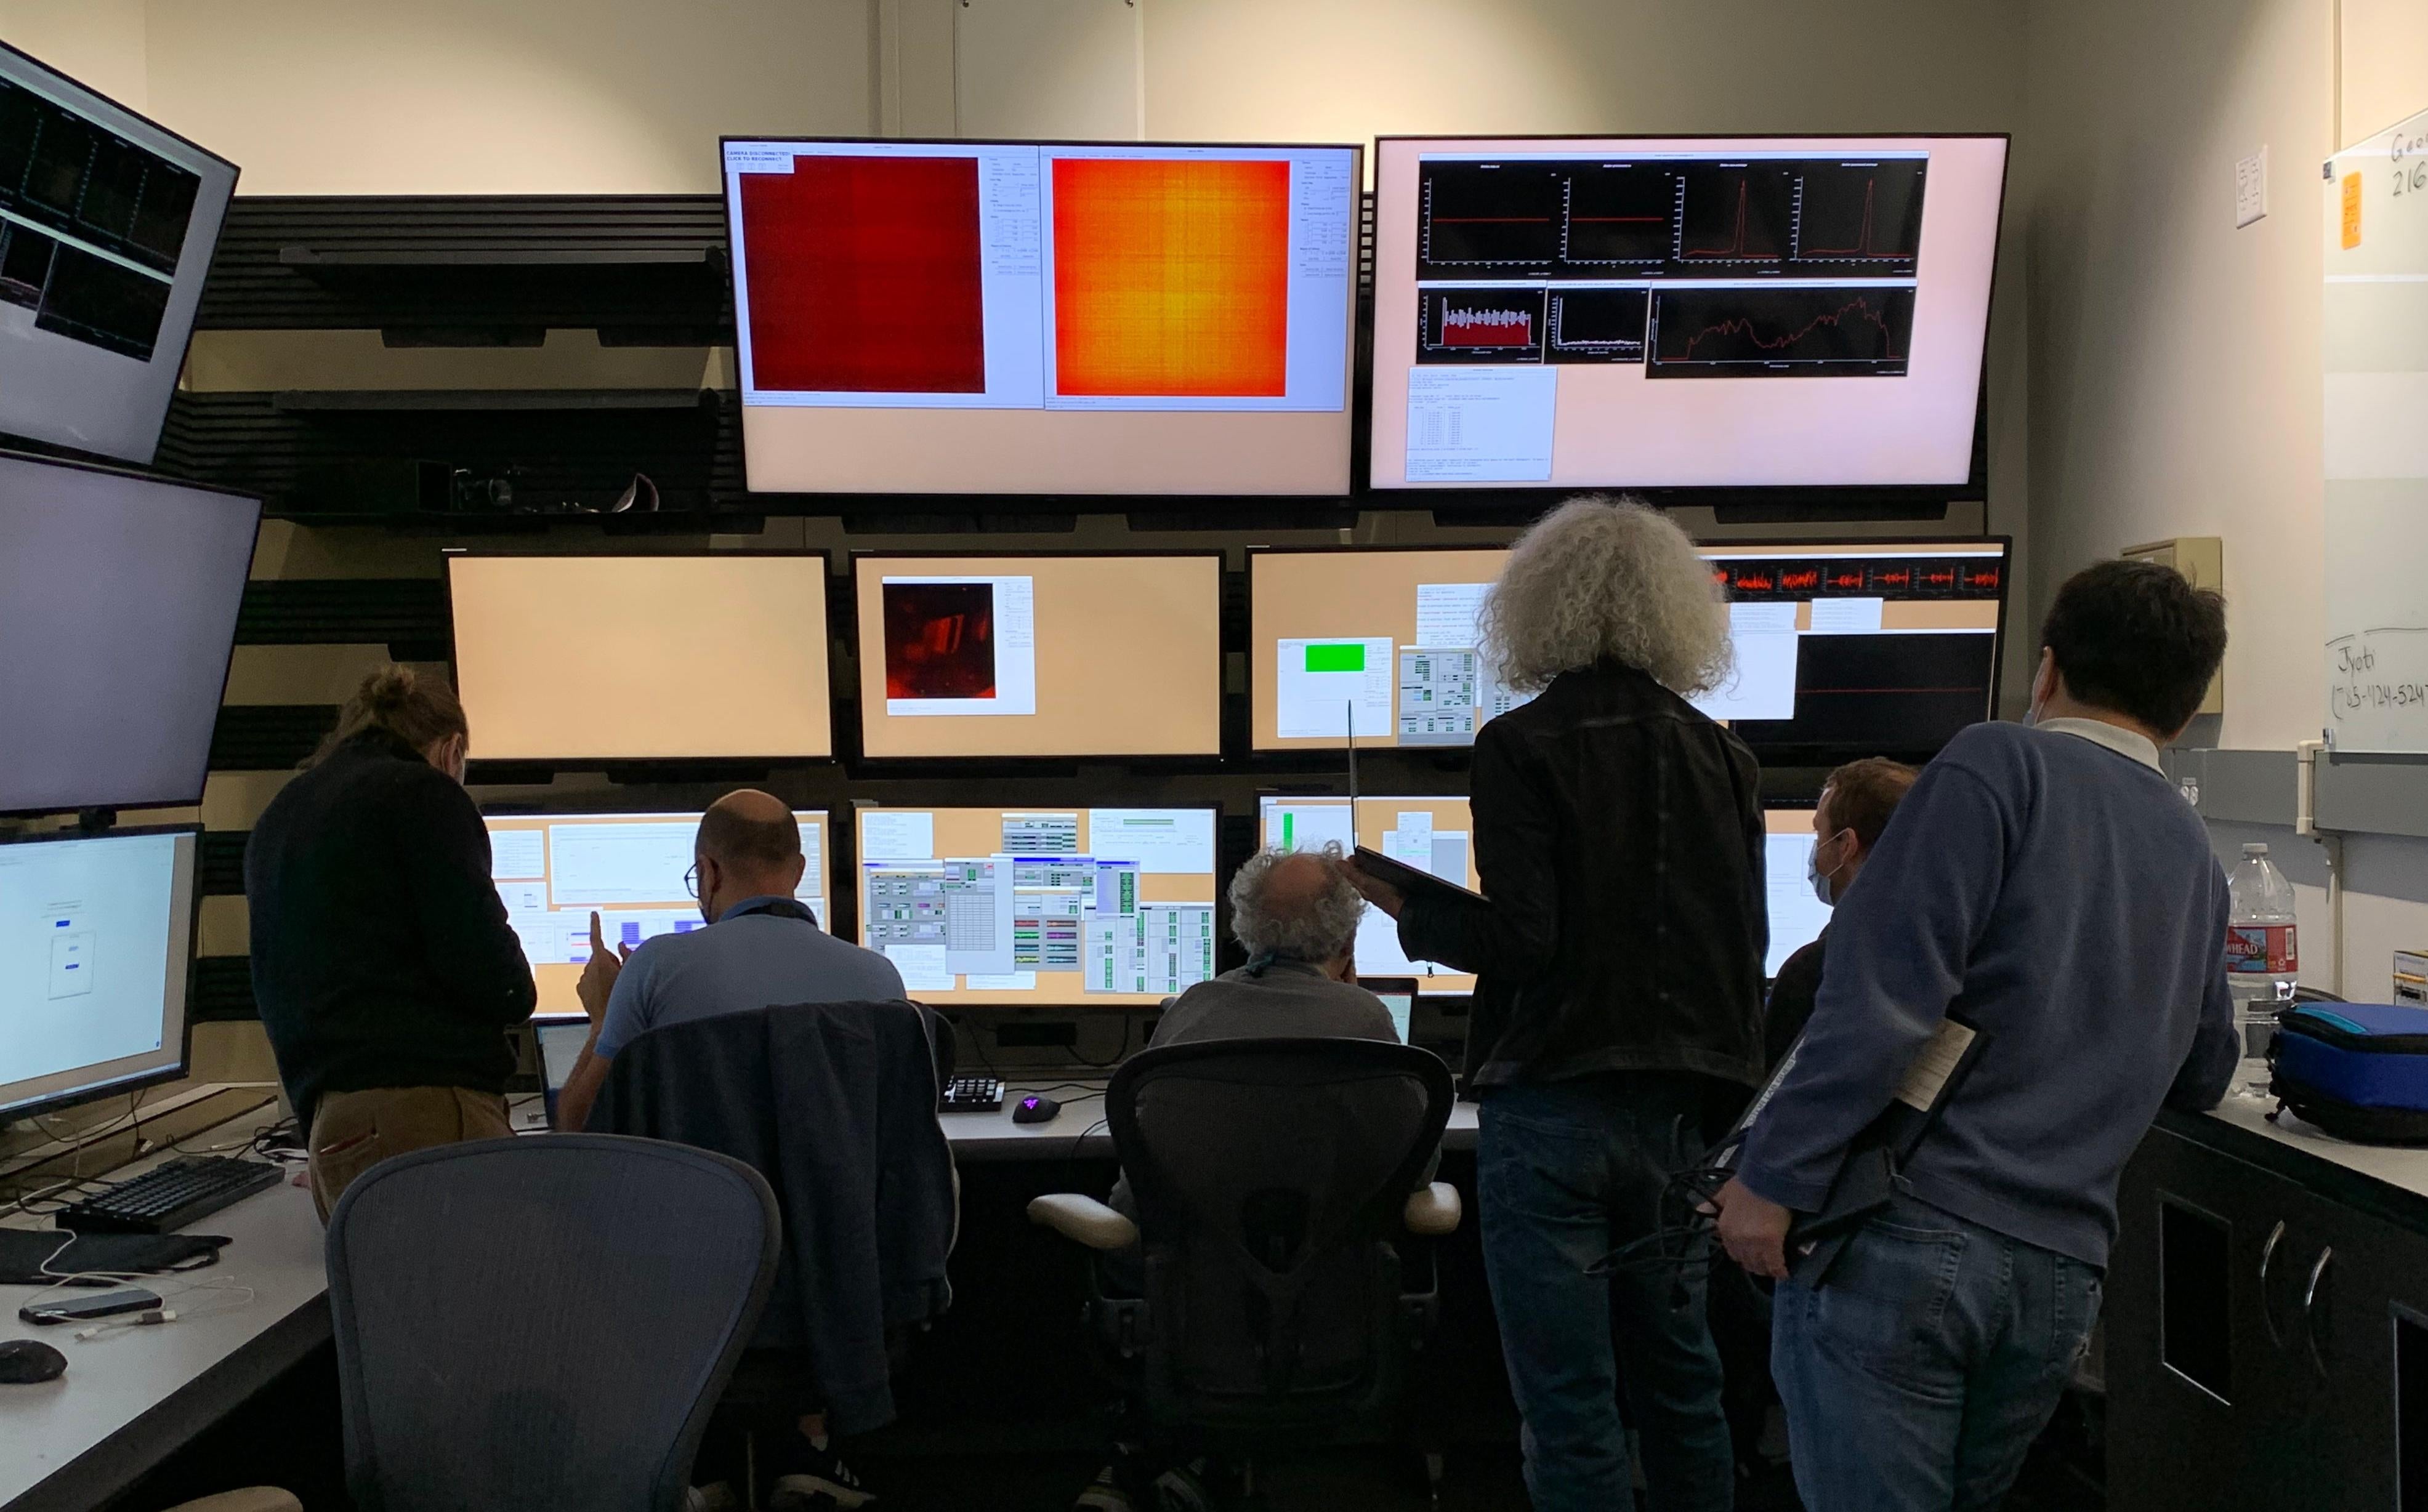 Researchers checkout results from the chemRIXS instrument tests. (Photo: Isaac Schultz)